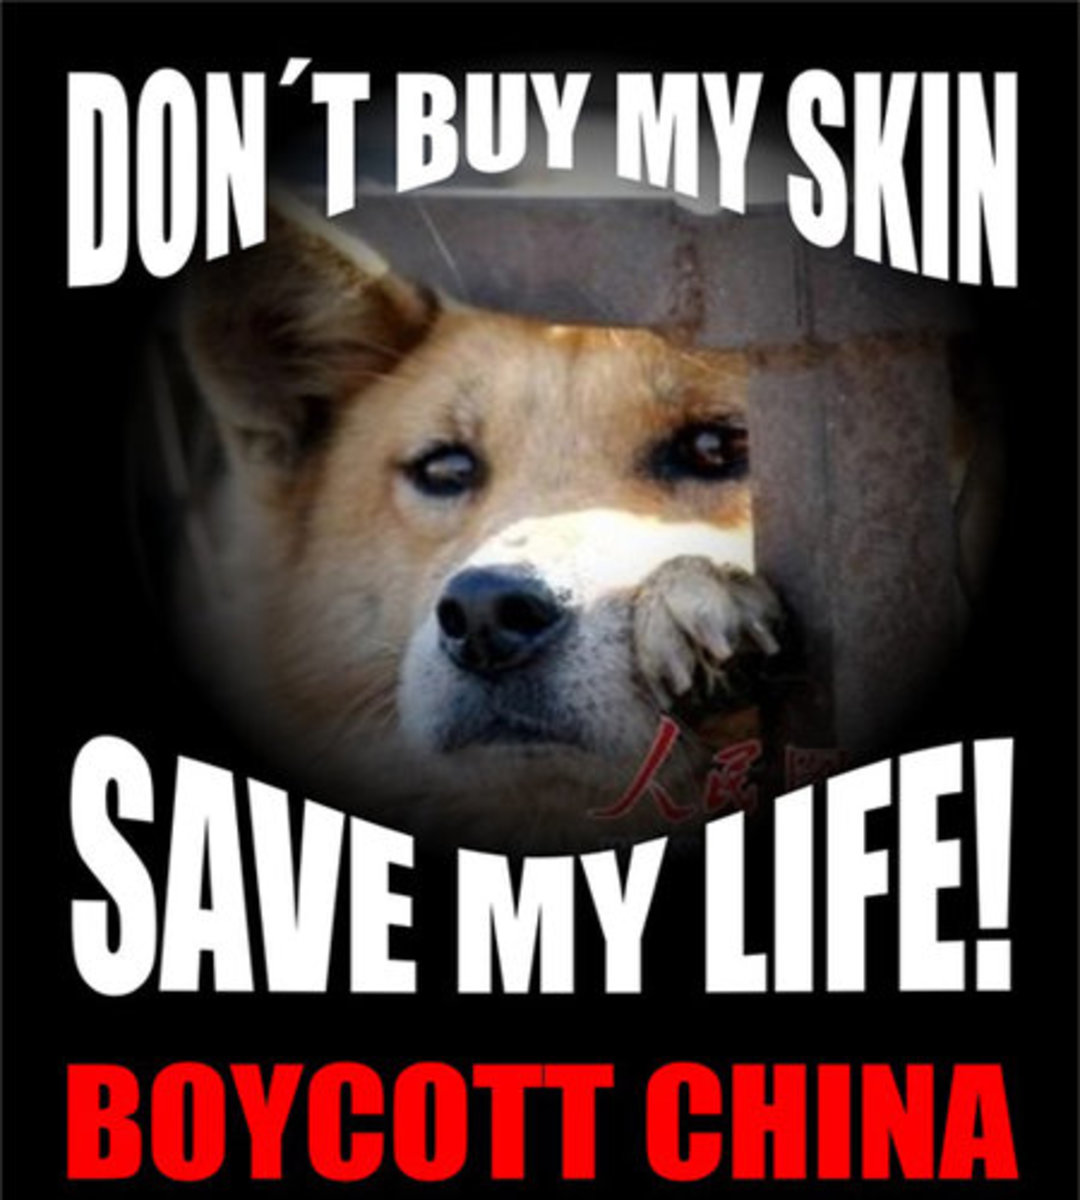 Dog in China.   It's not difficult to boycott products Made in China.  You just don't buy them.